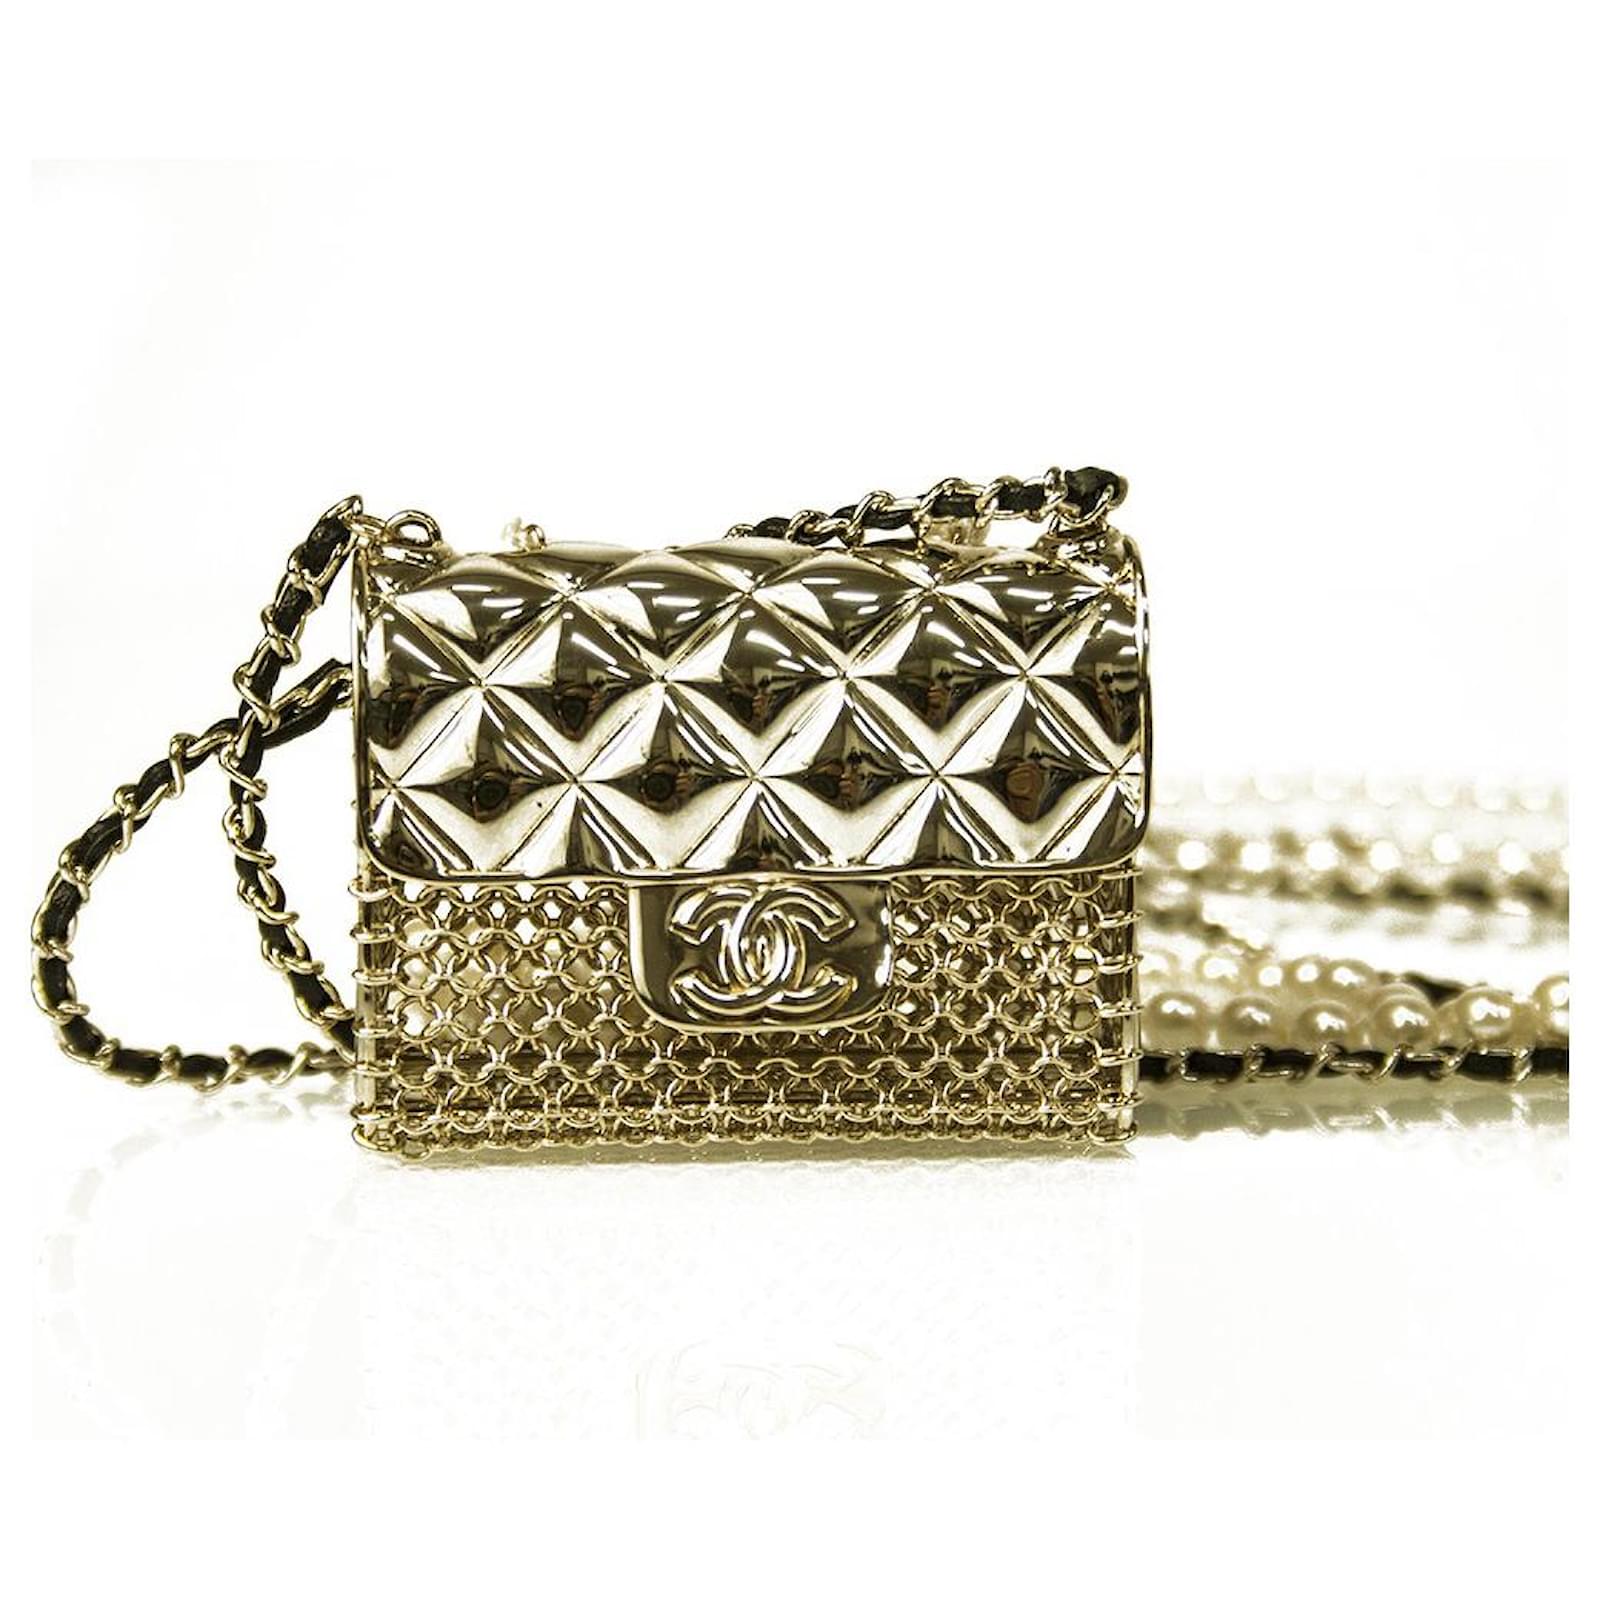 Chanel 21S Runway Micro Pearl Bag Metal CC Limited Edition